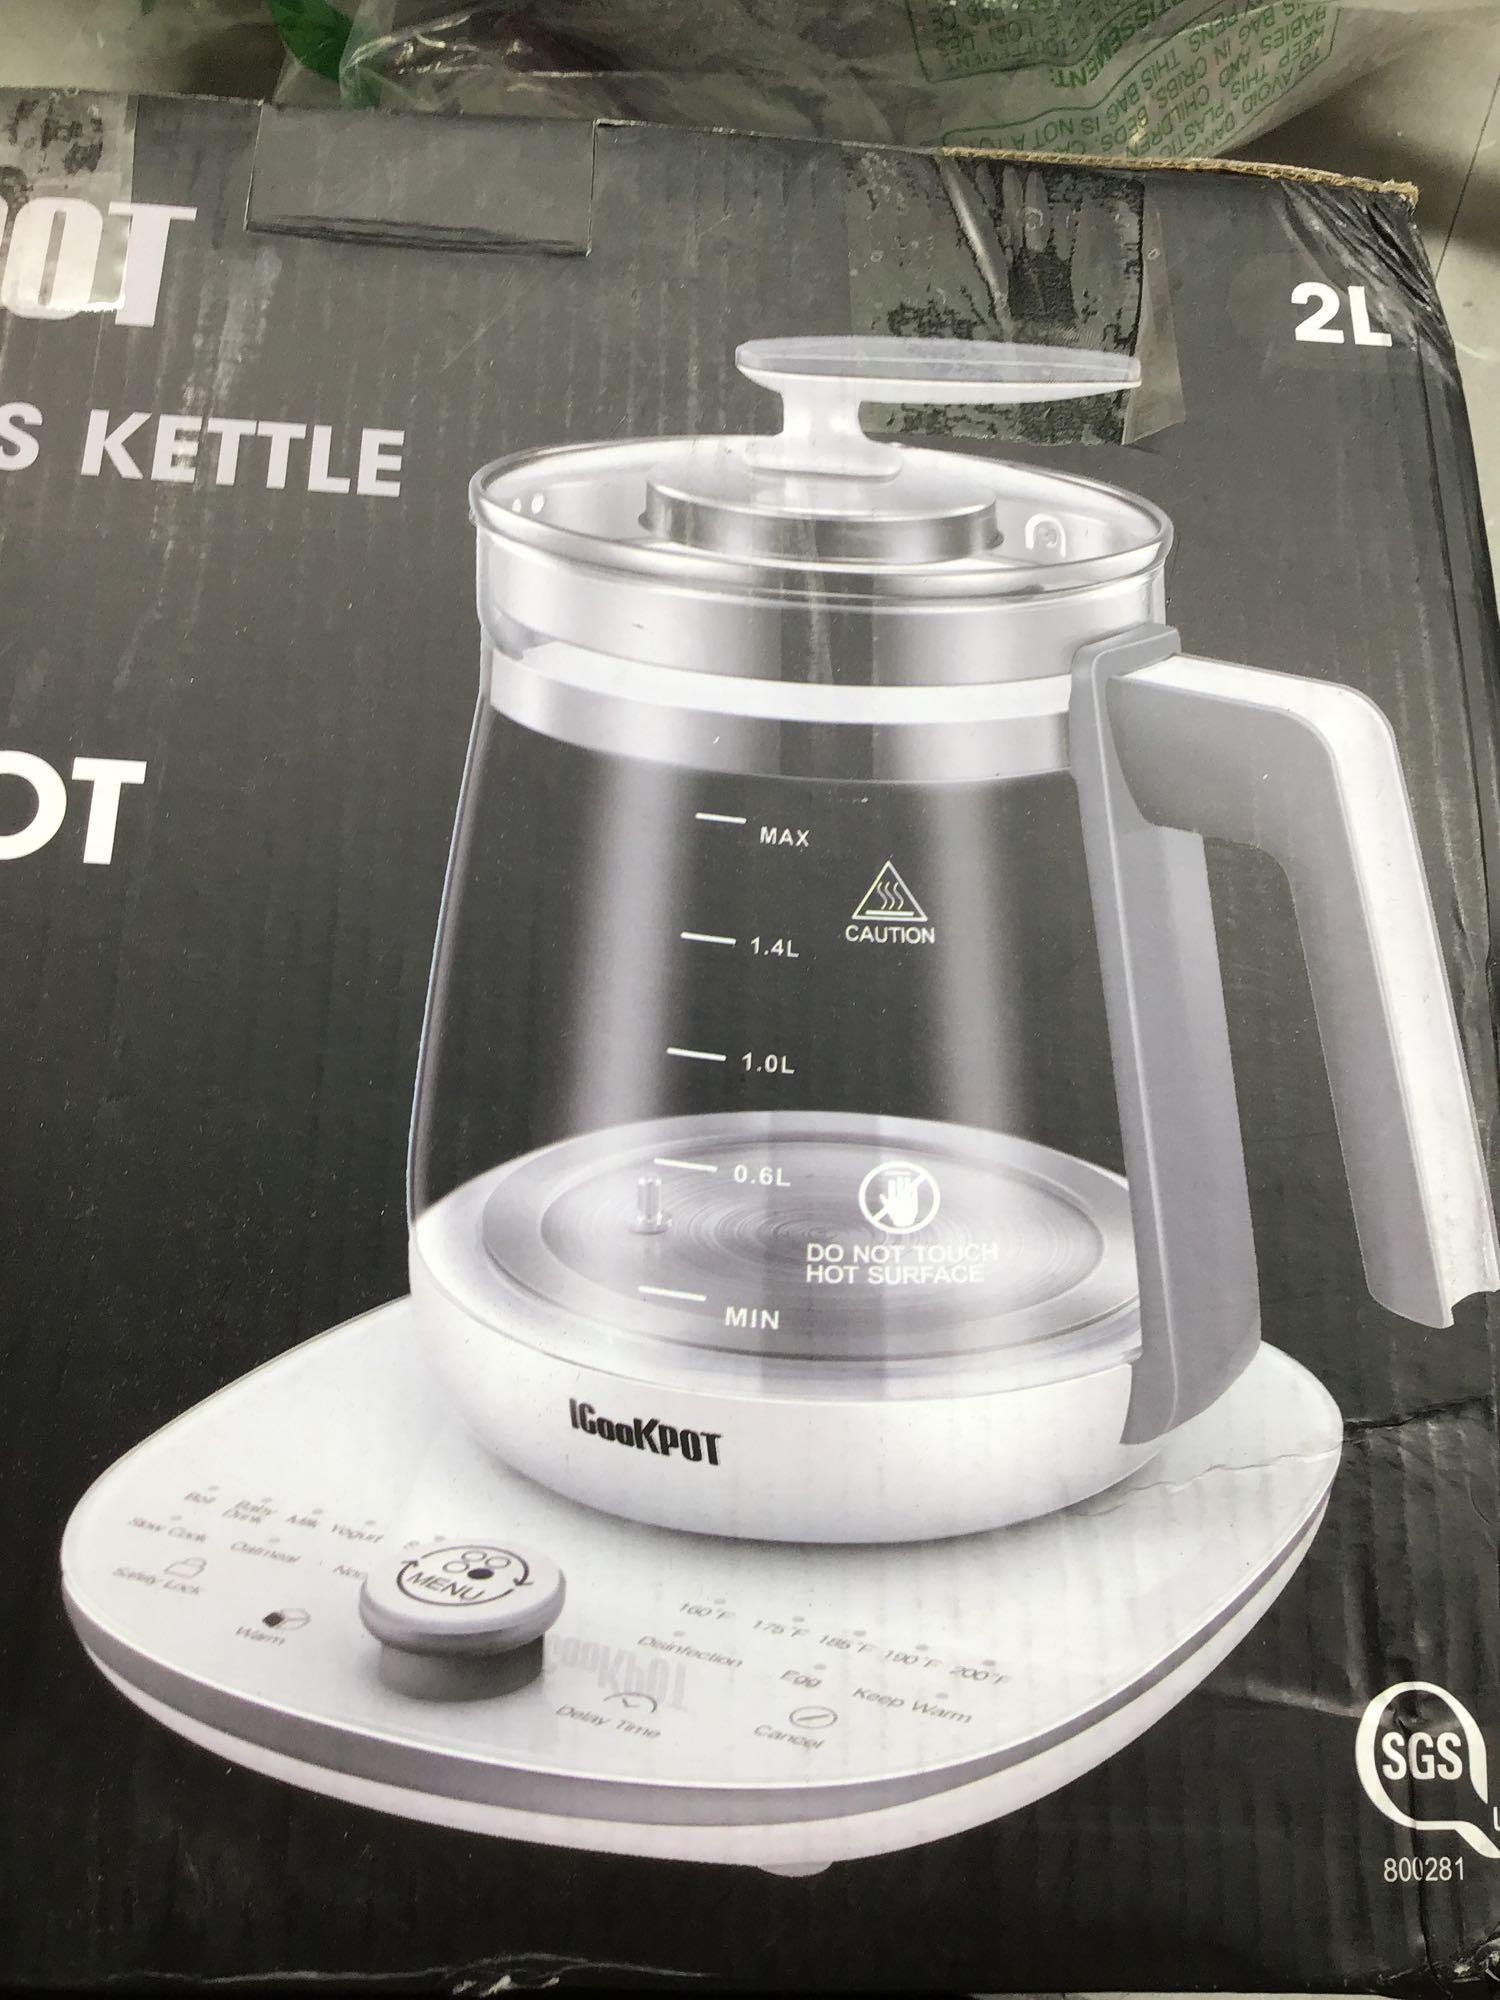 Lot - New ICookPot Multi-Glass 2 Liter Electric Kettle